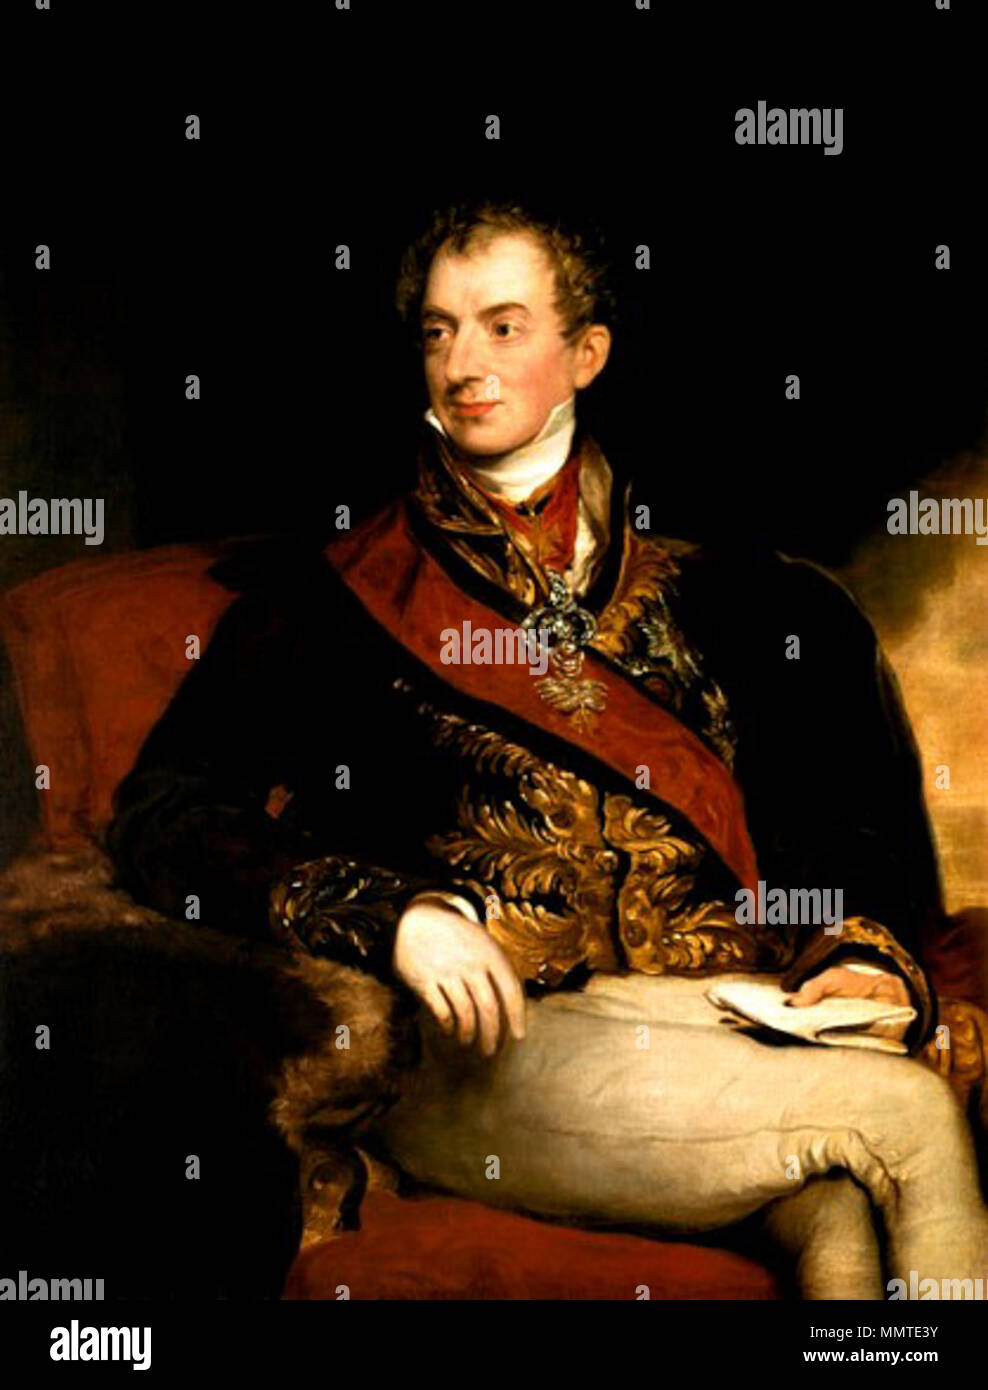 . The original work was first exhibited in 1815, but probably revised in 1818/9 [1].  Portrait of Prince Klemens Wenzel von Metternich, German-Austrian diplomat, politician and statesman (1773-1859). 1815. Prince Metternich by Lawrence Stock Photo